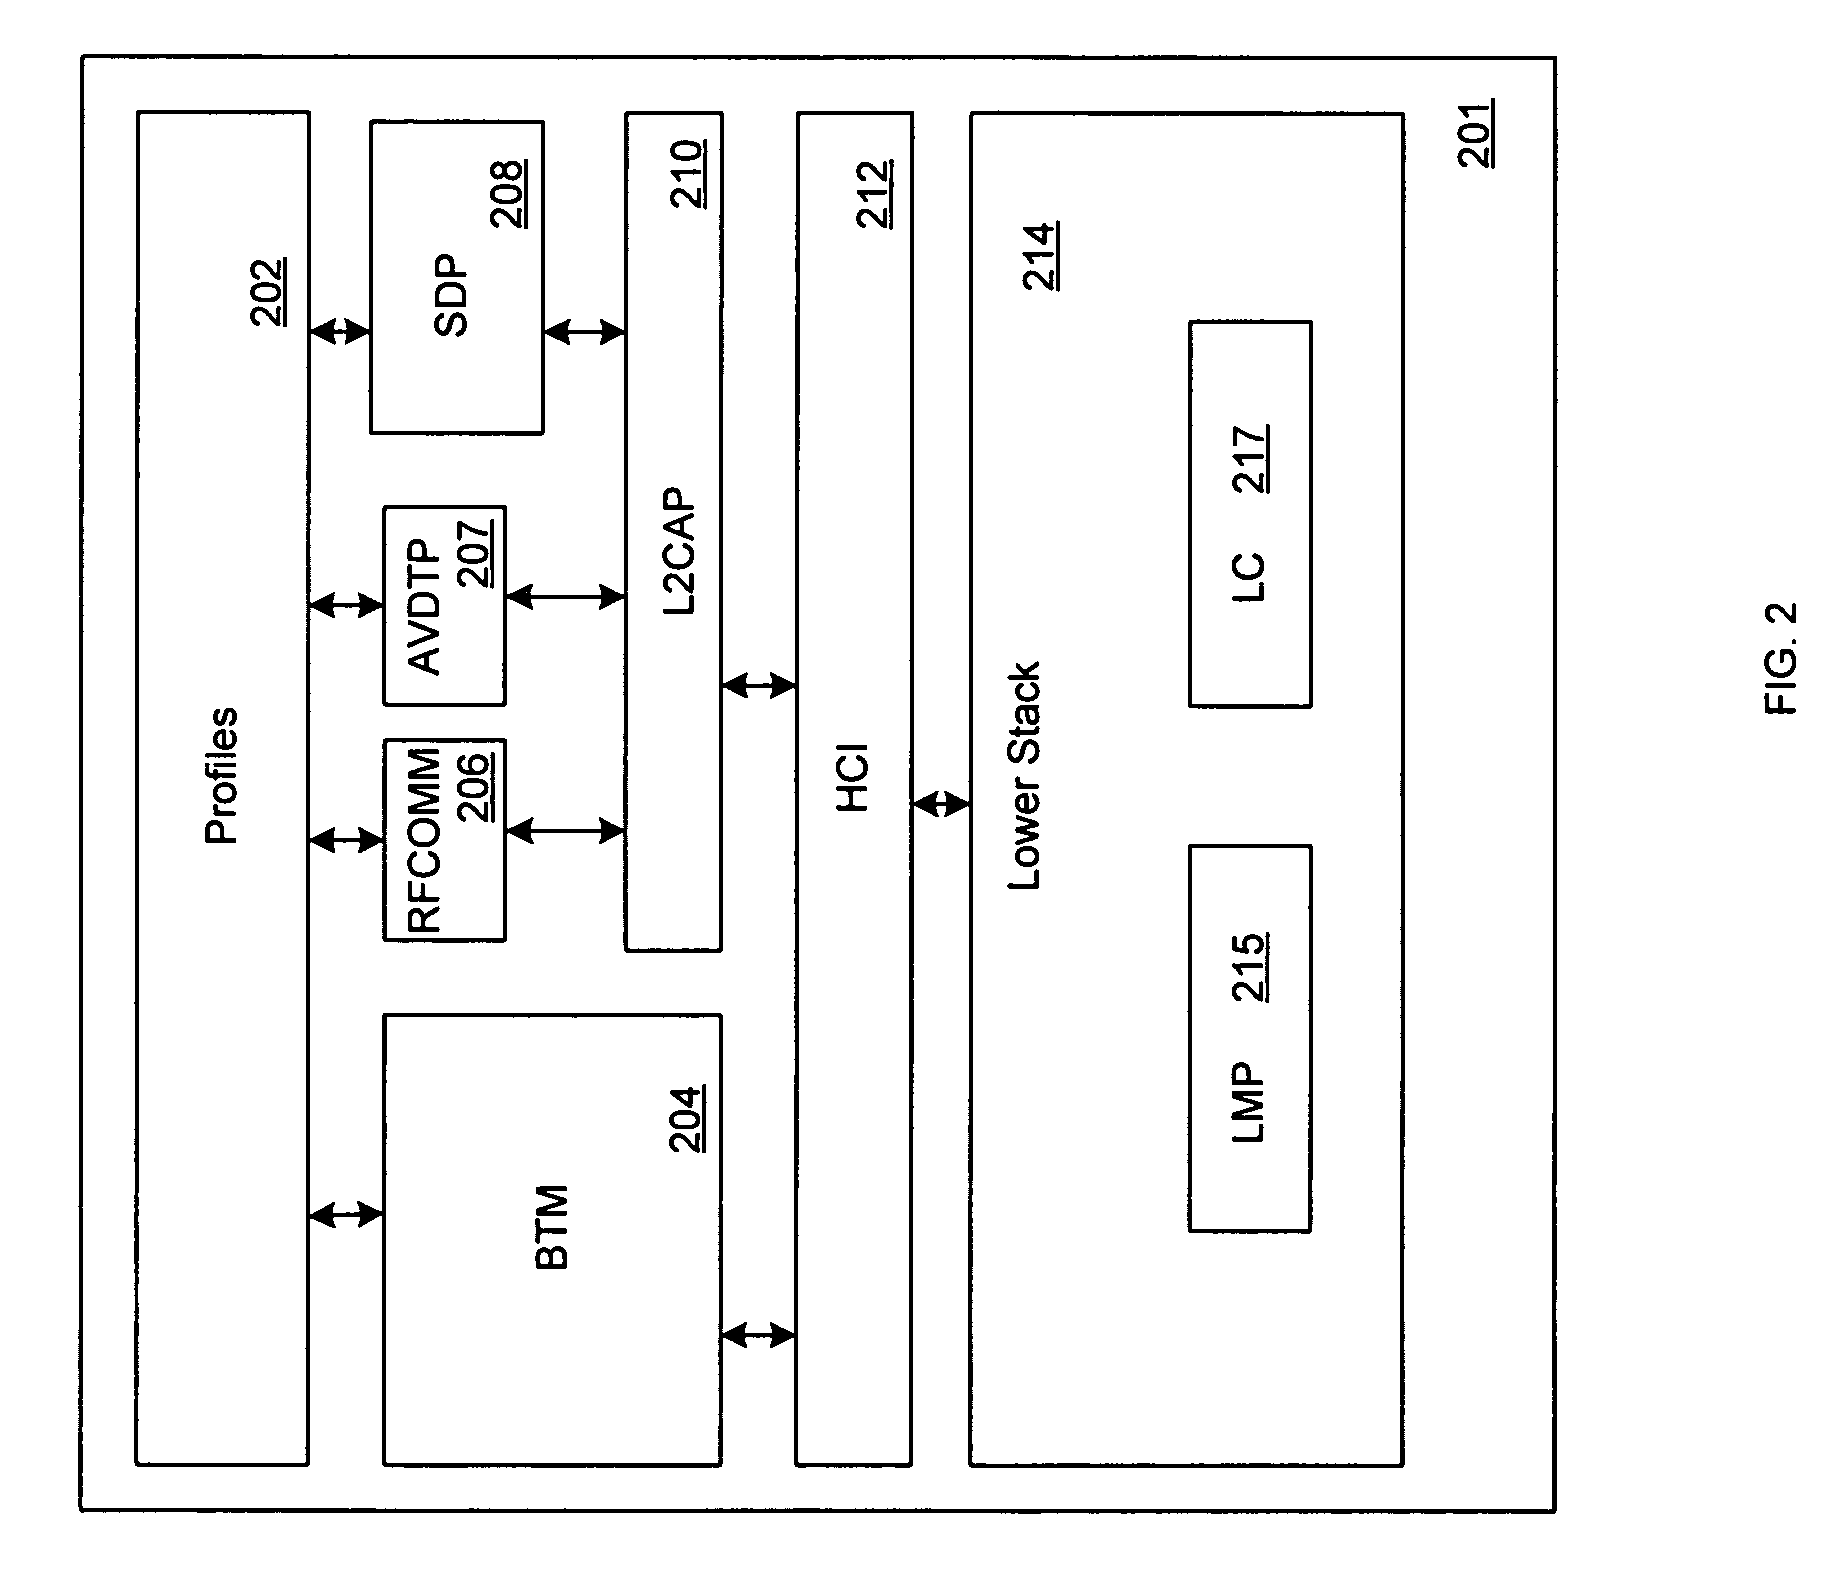 Method and system for optimized architecture for bluetooth streaming audio applications